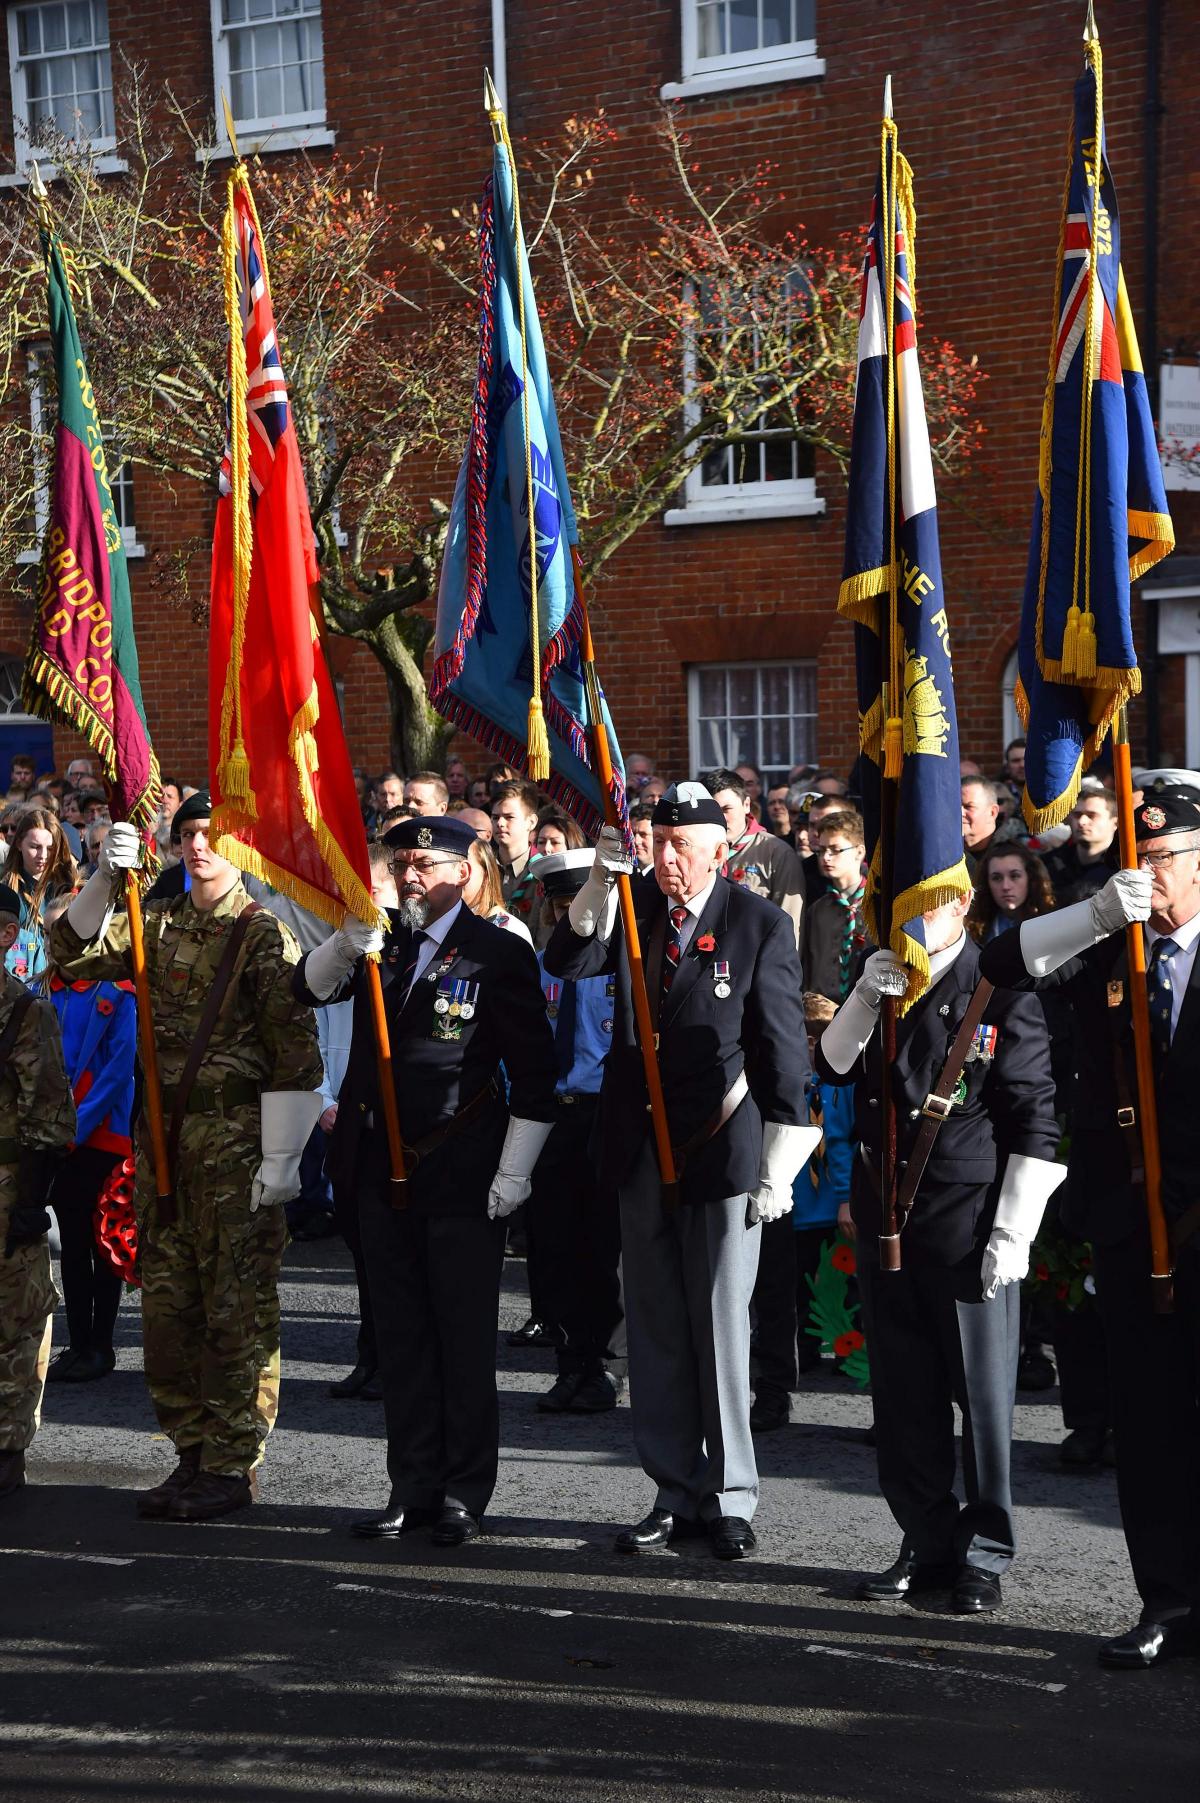 Remembrance parade and service in Bridport 2018